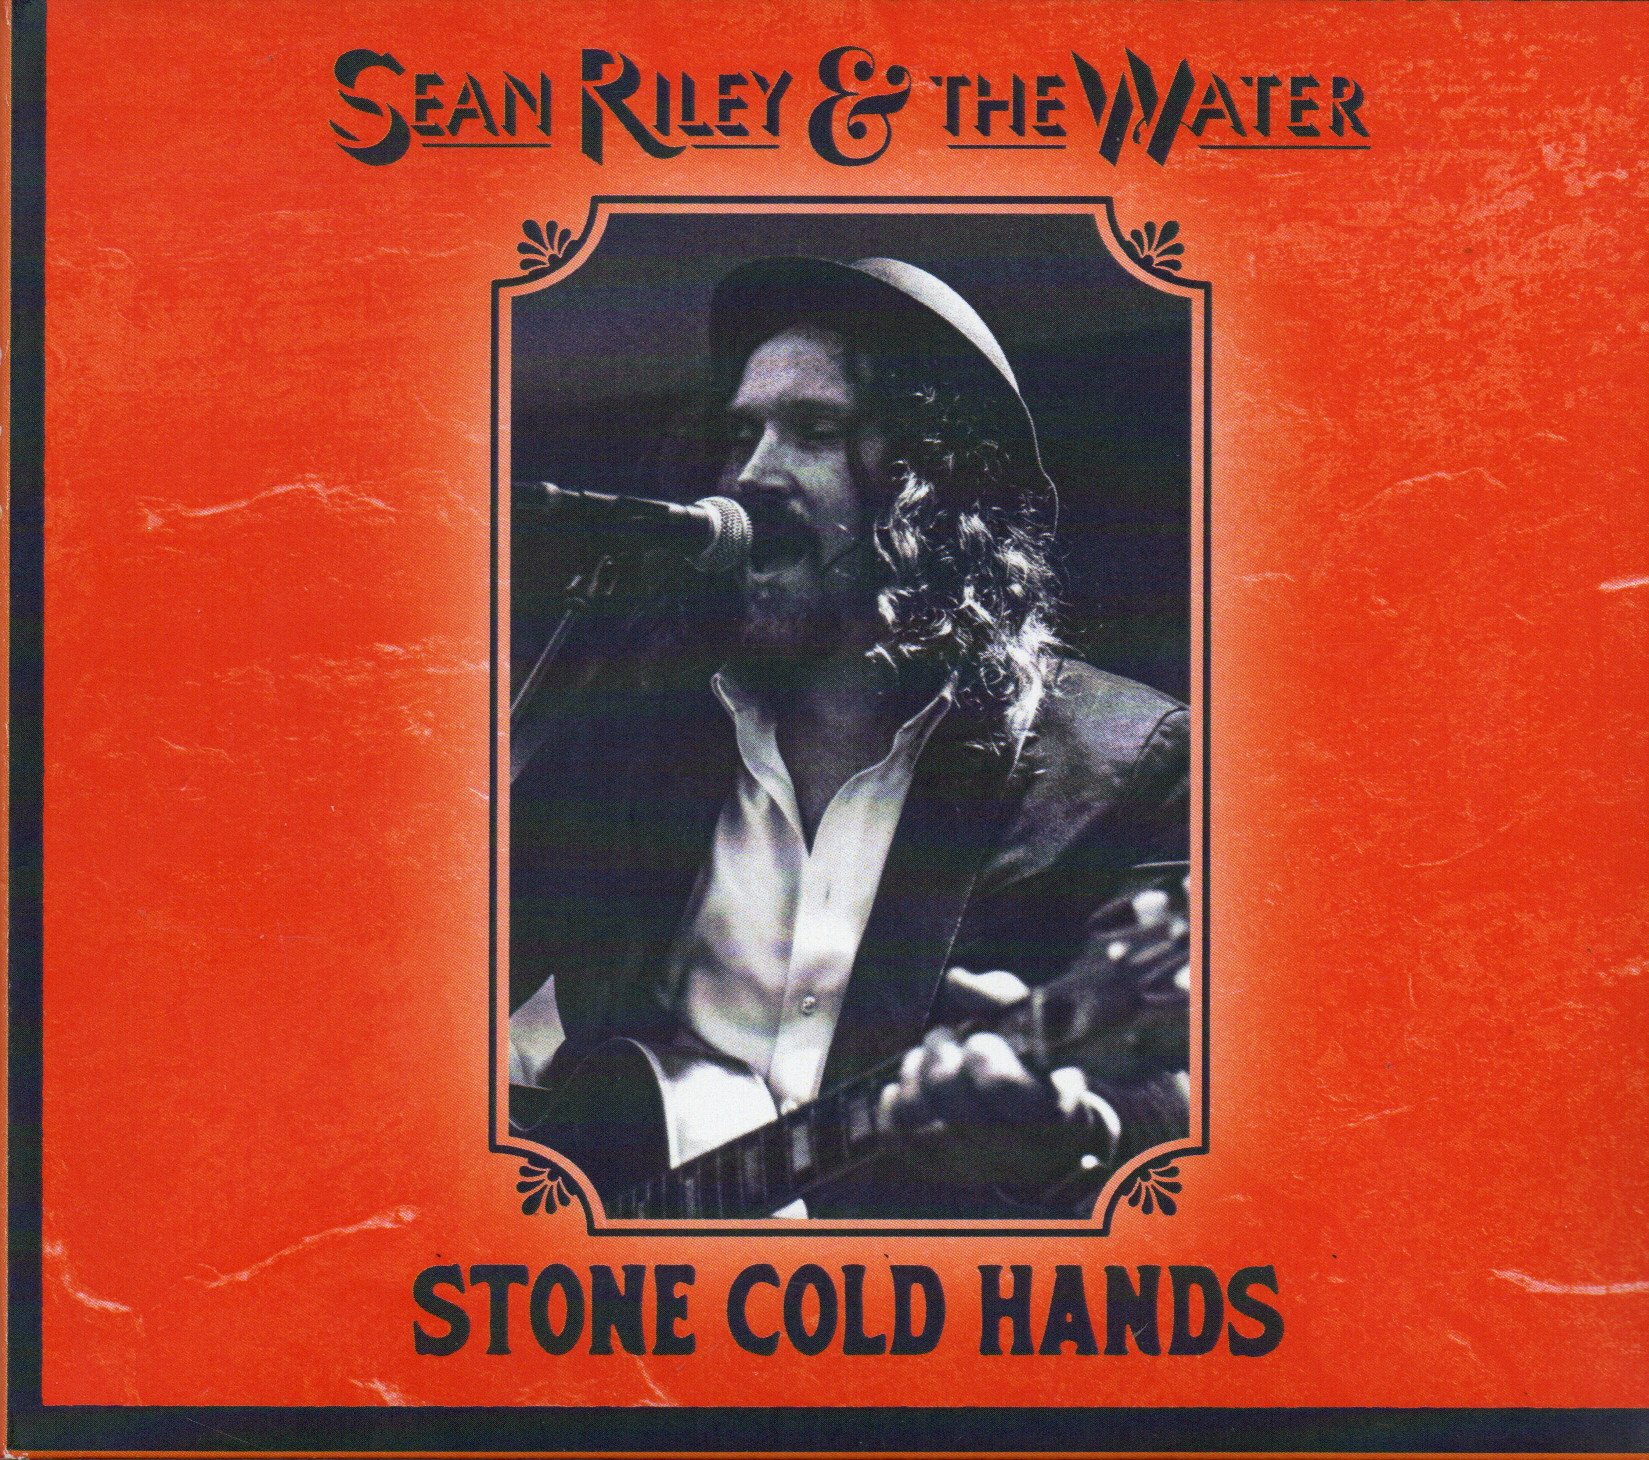 Sean Riley & The Water "Stone Hold Hands"